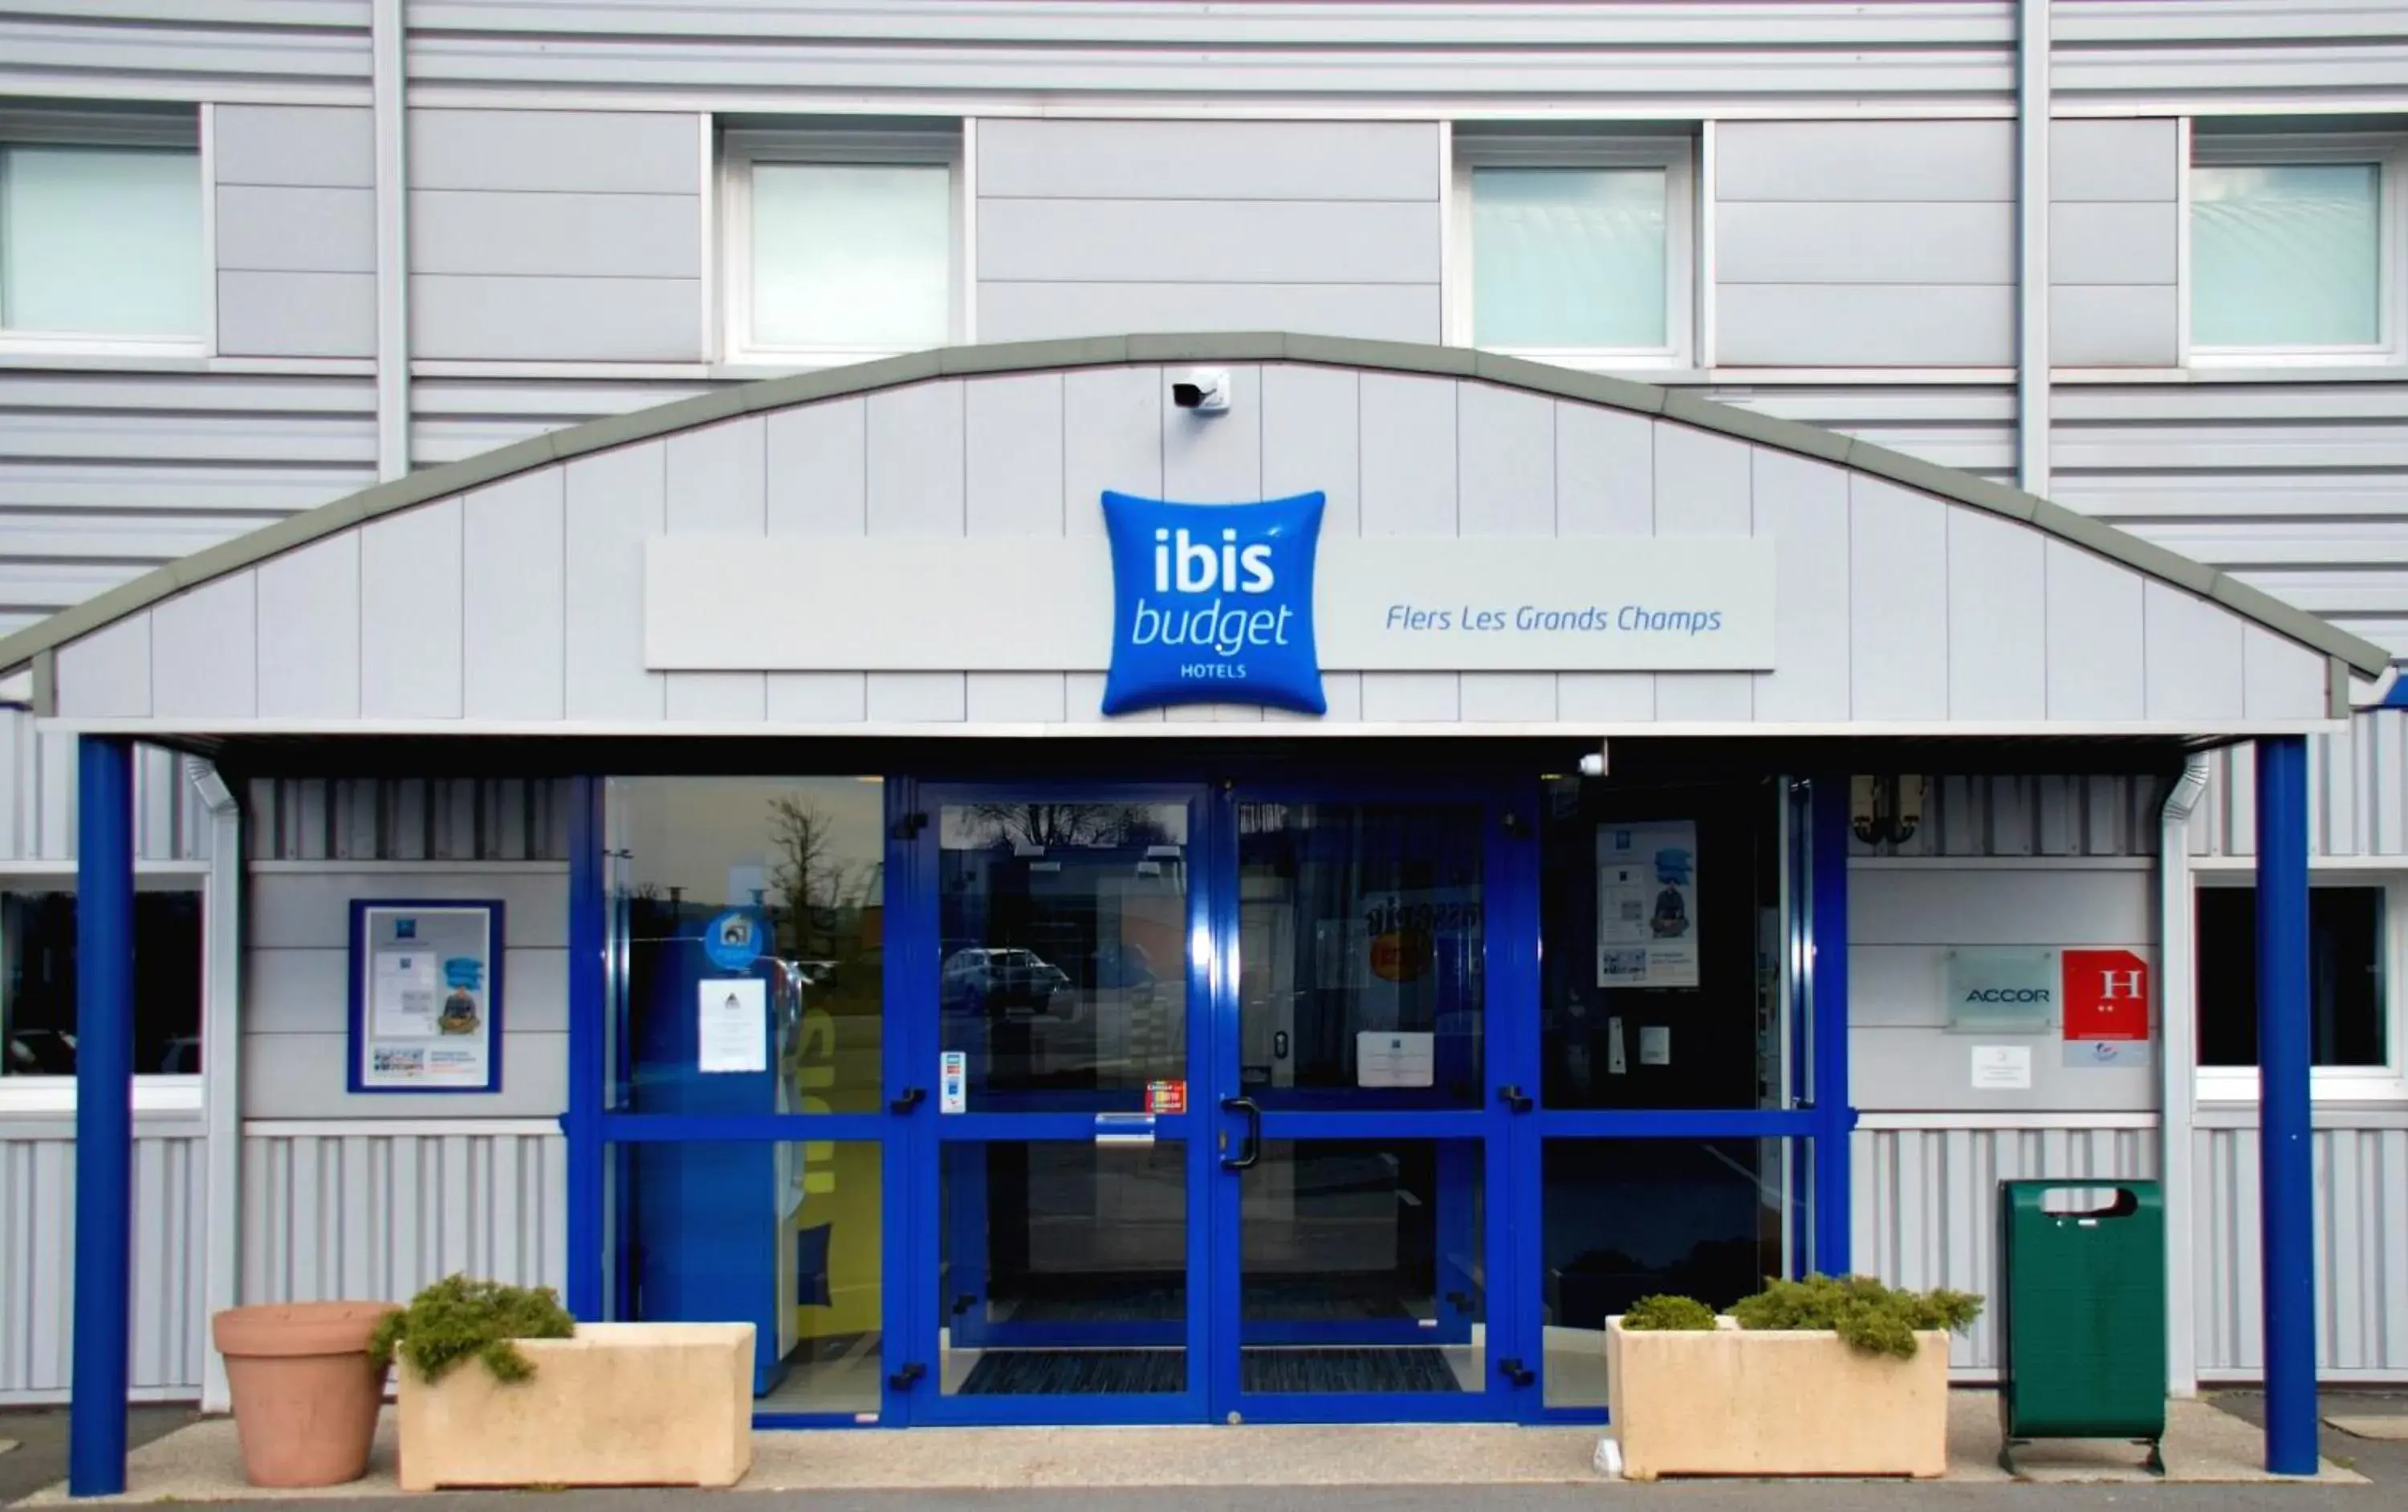 Facade/entrance in ibis budget Flers Les Grands Champs